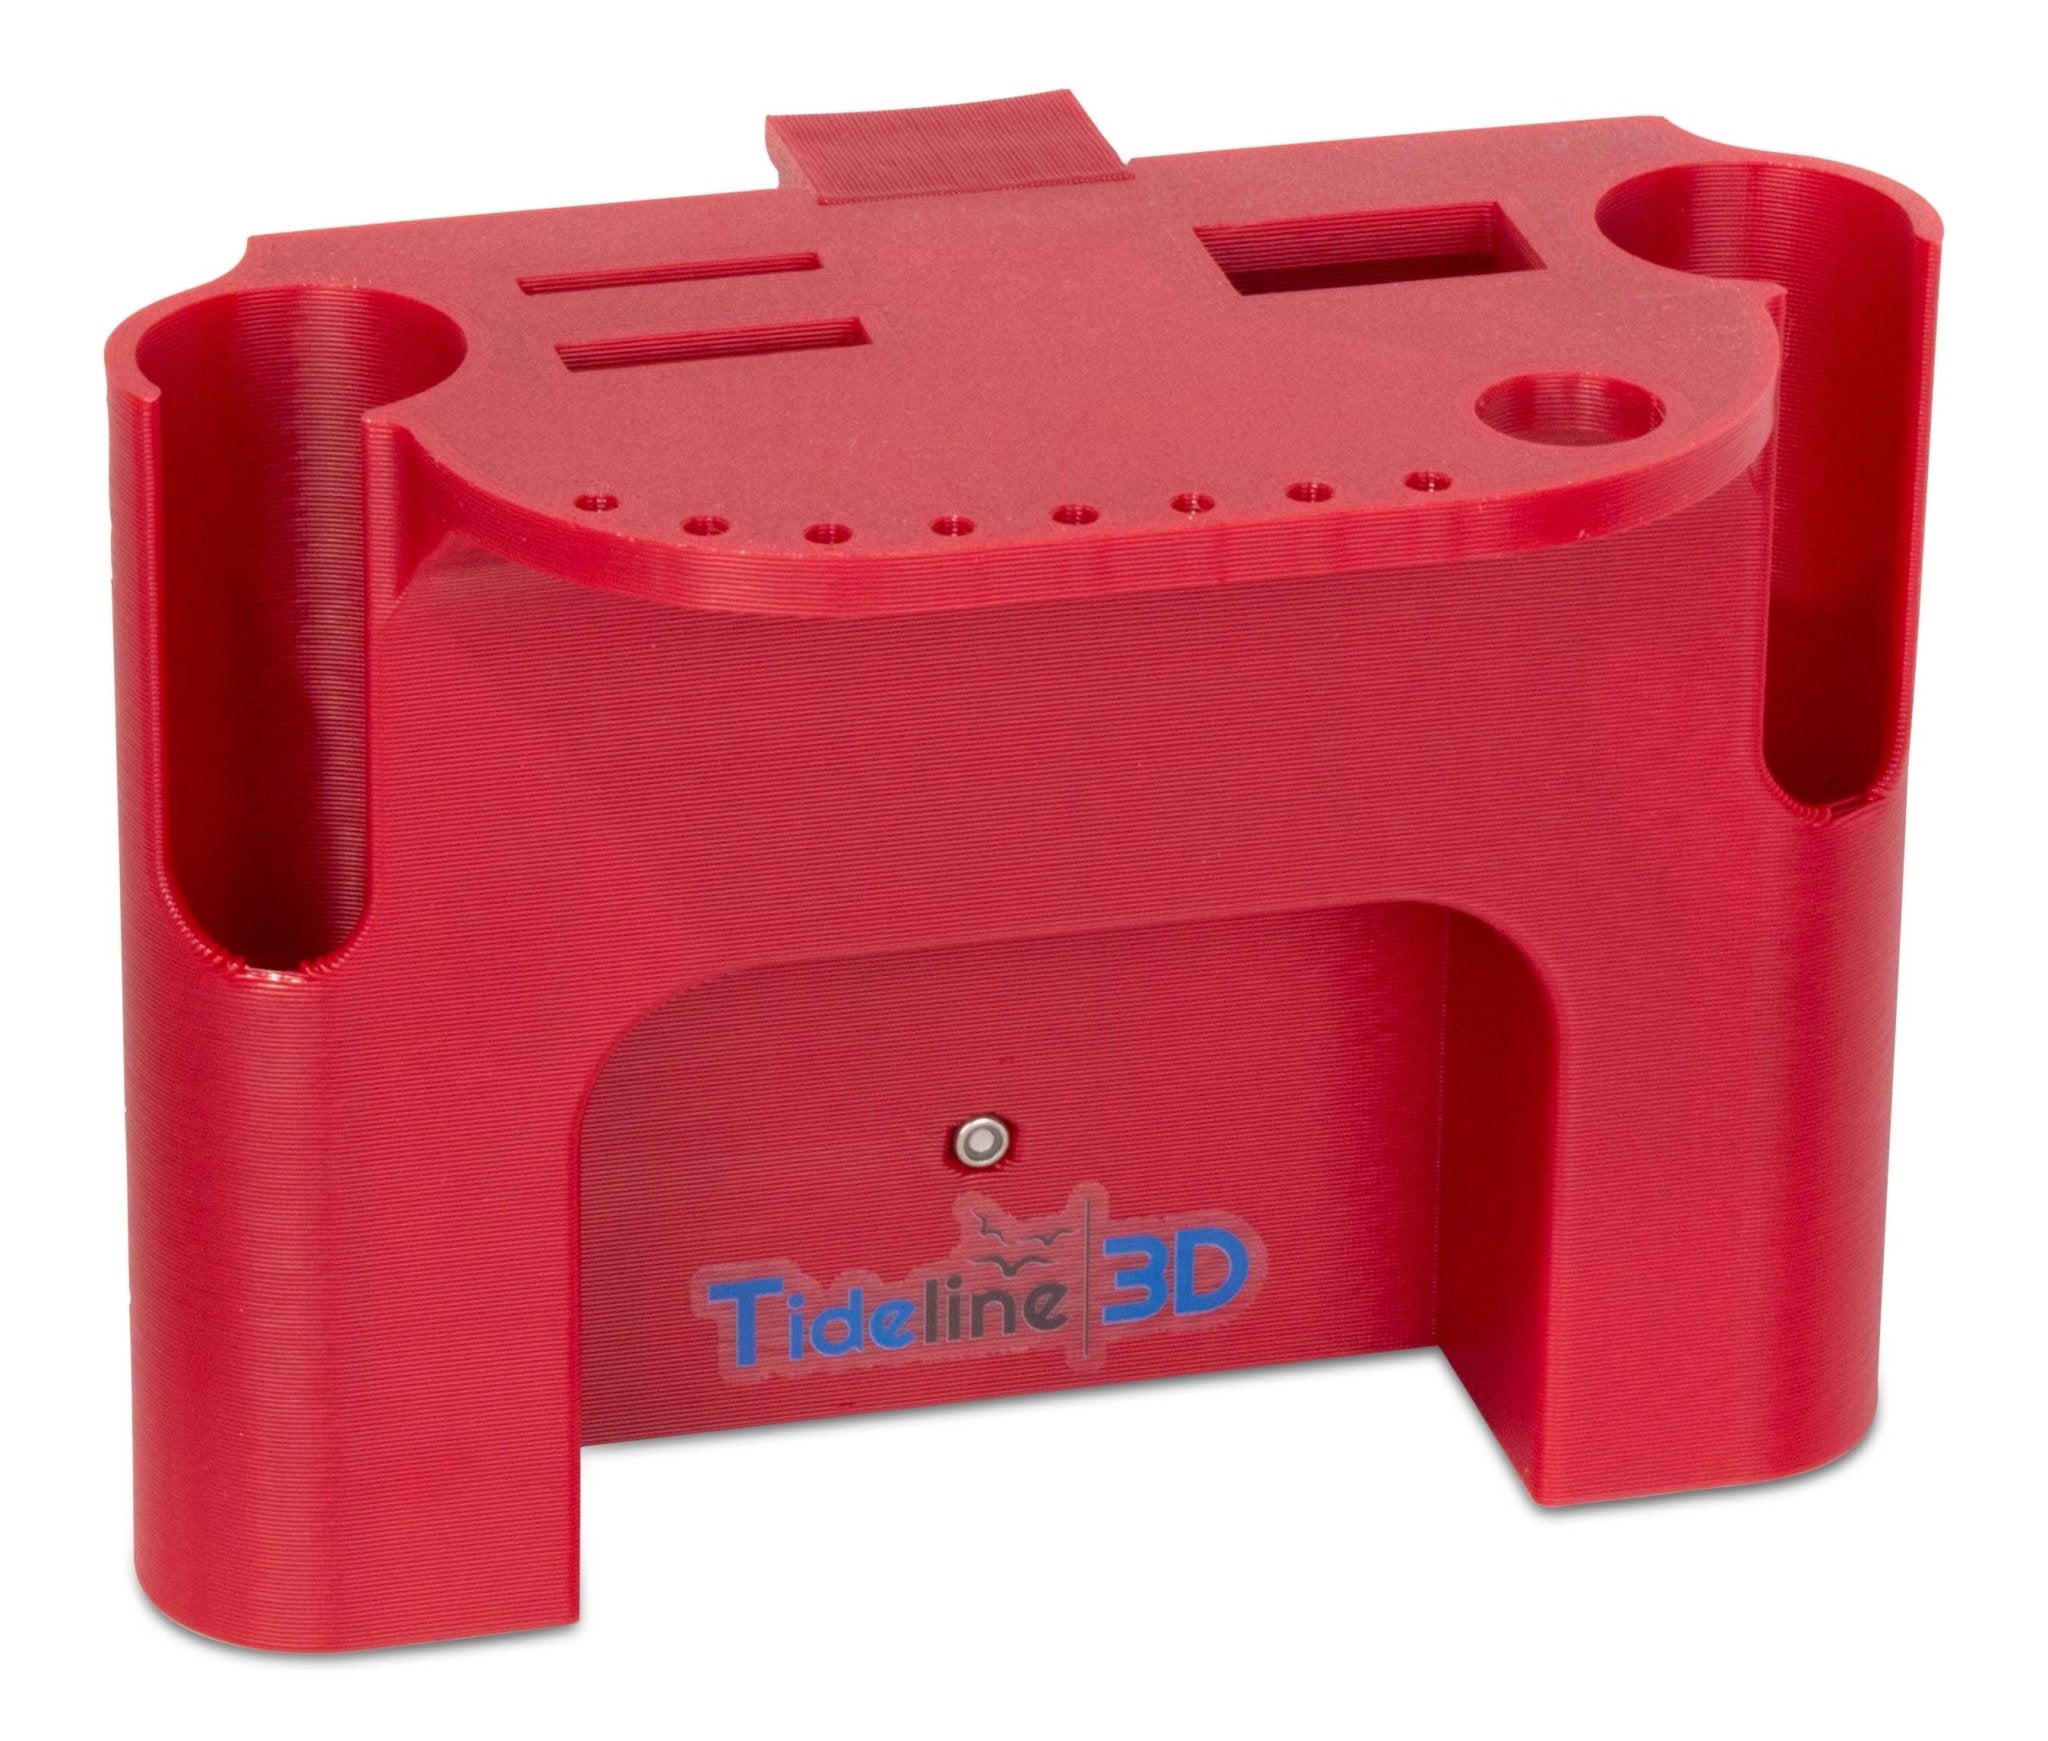 Fishing Rod Holder for RTIC Coolers – Tideline3D